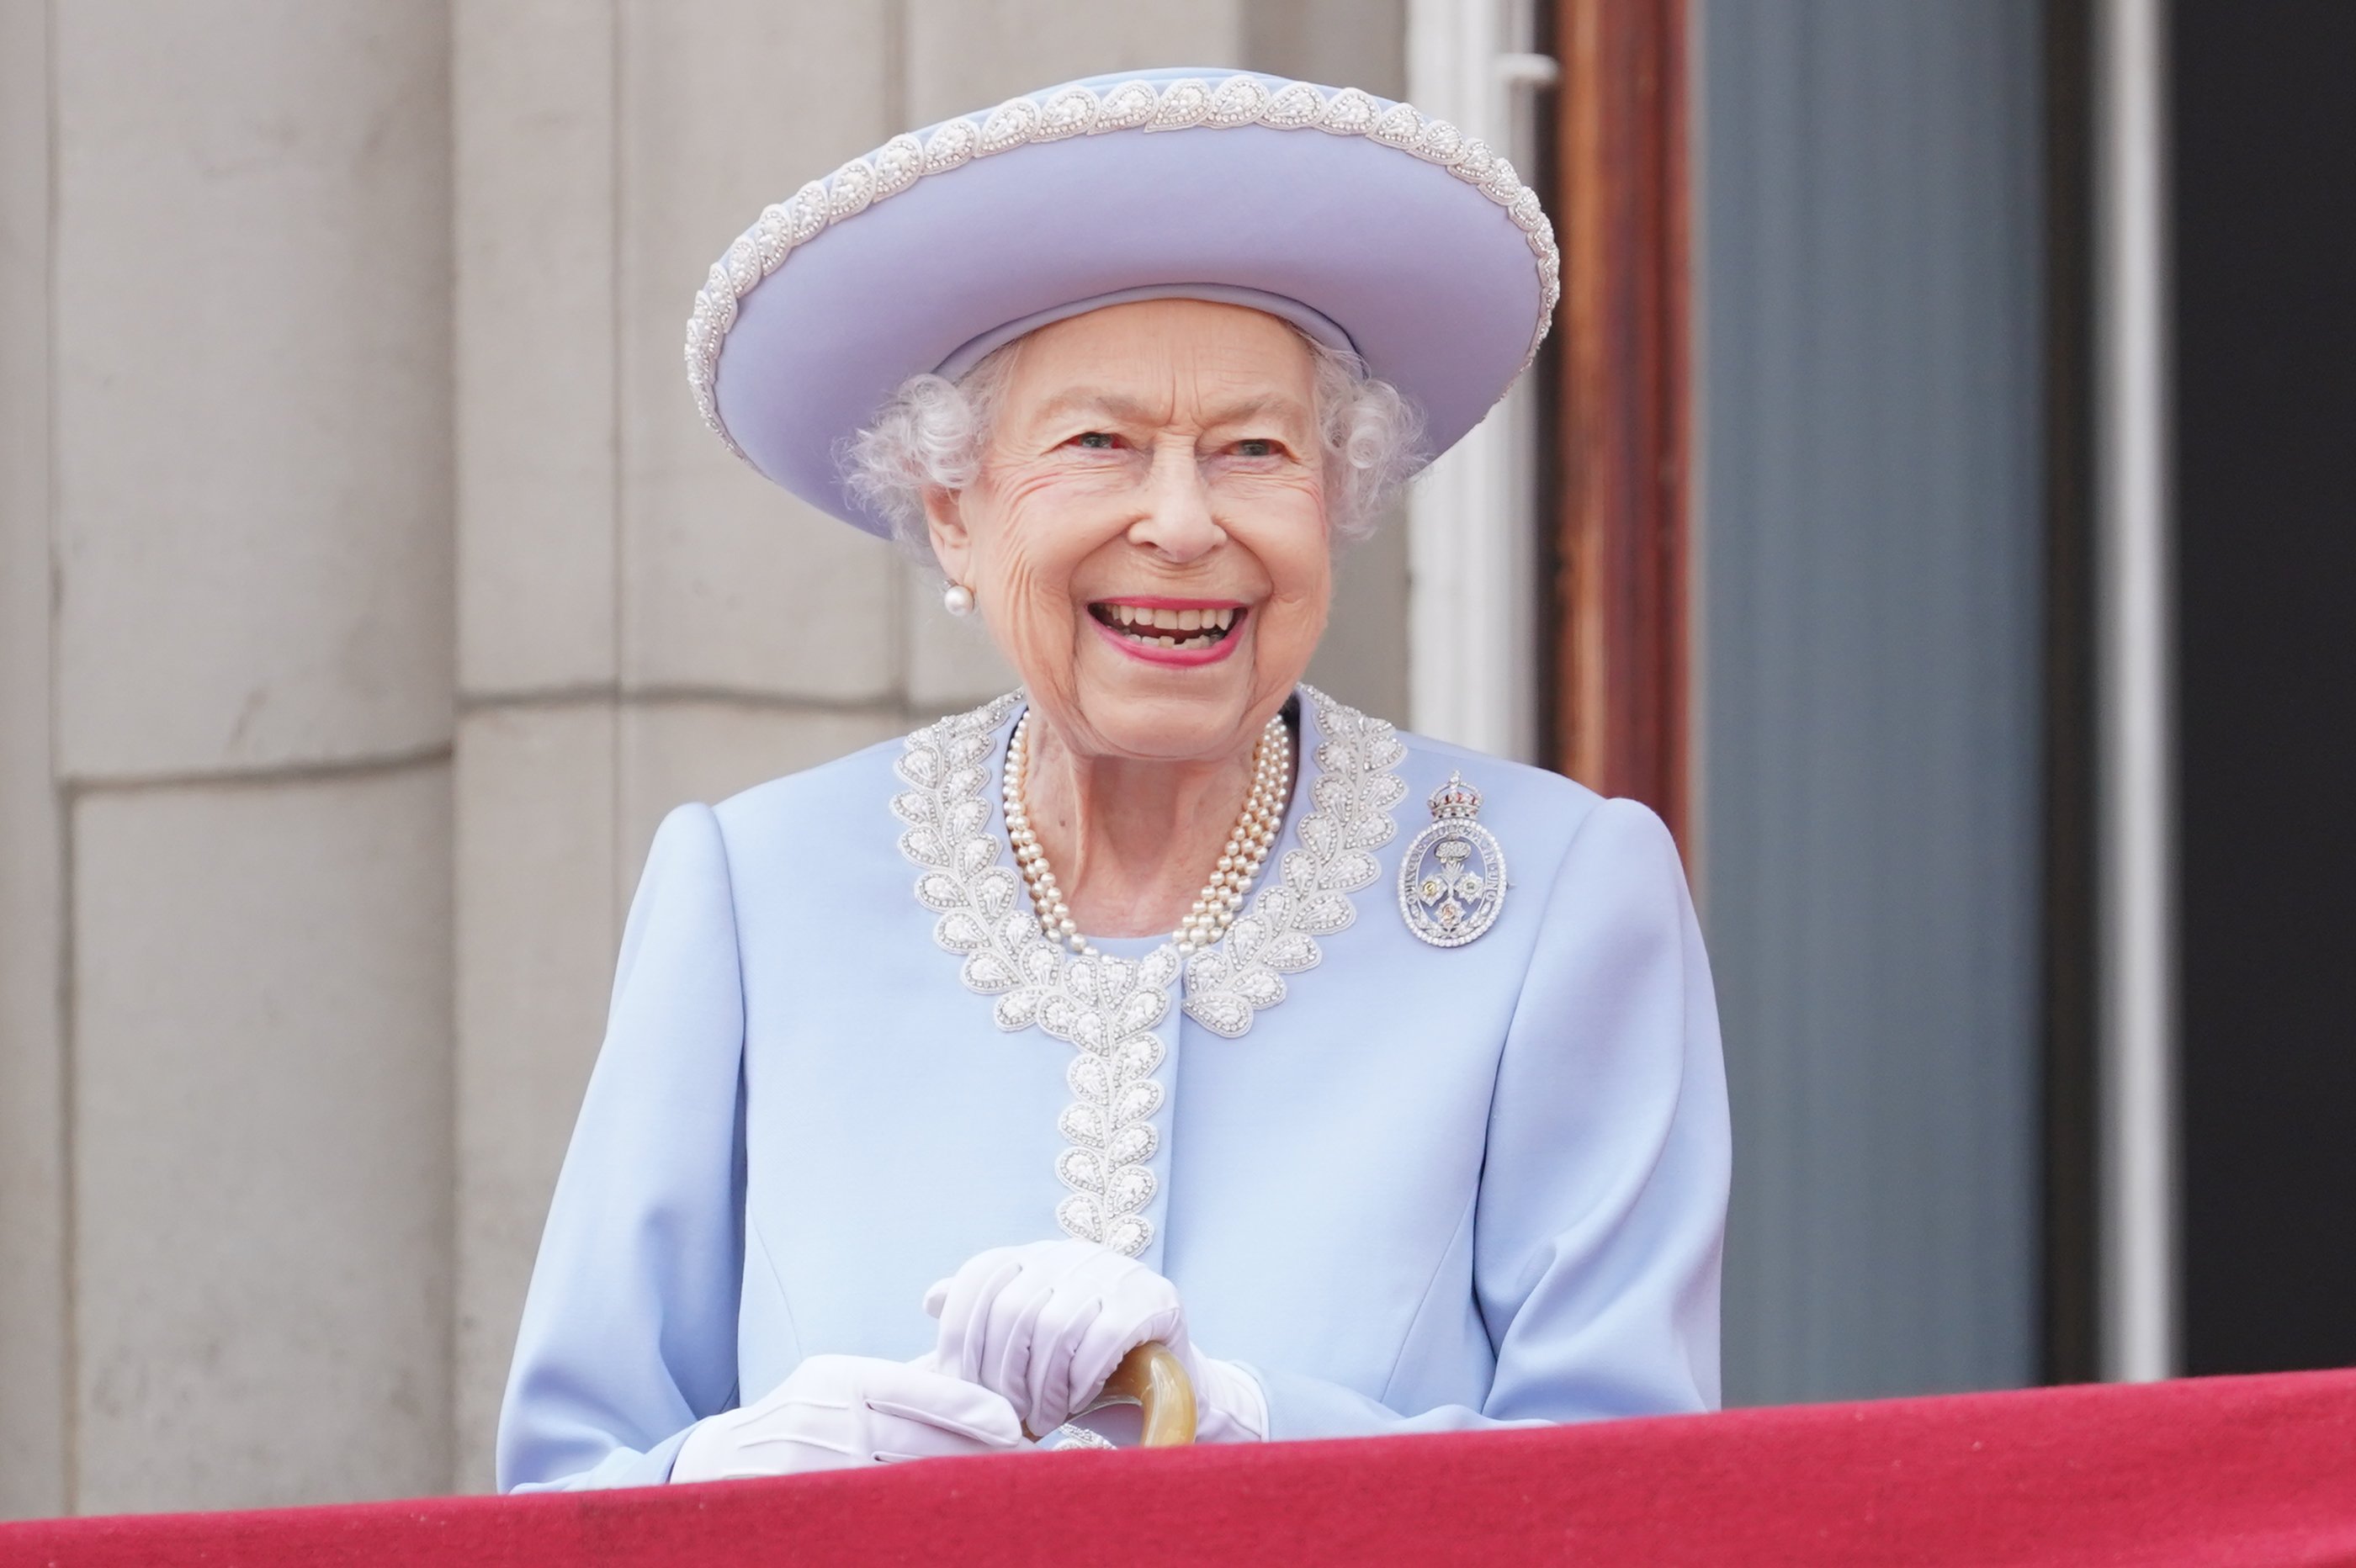 Queen Elizabeth II watches from the Buckingham Palace balcony during the Trooping the Color parade on June 2, 2022 in London, England.  |  Source: Getty Images